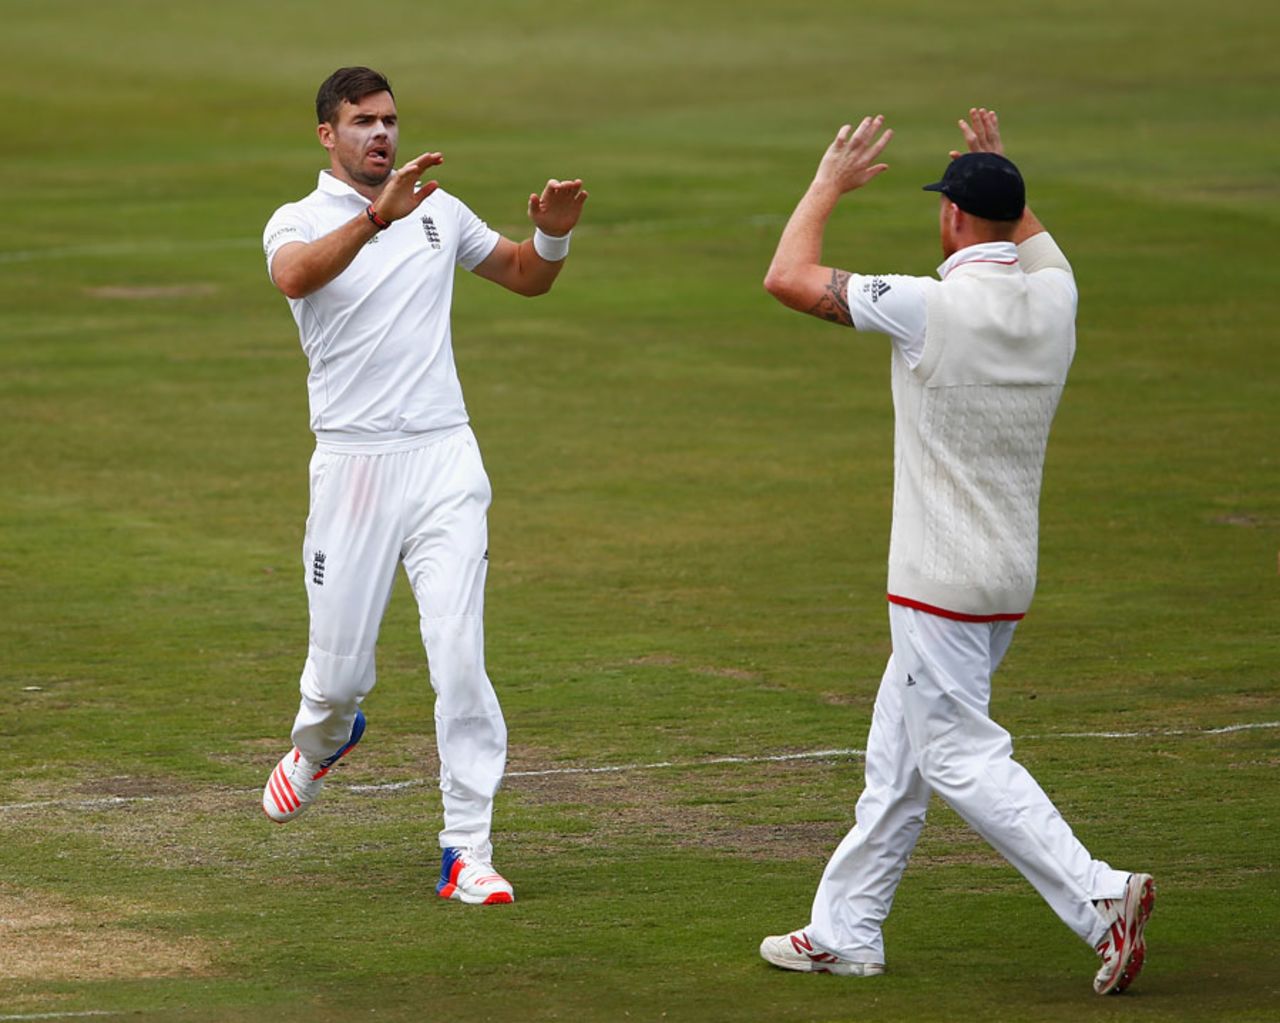 James Anderson picked up two wickets in three balls, South Africa v England, 4th Test, Centurion, 4th day, January 25, 2016